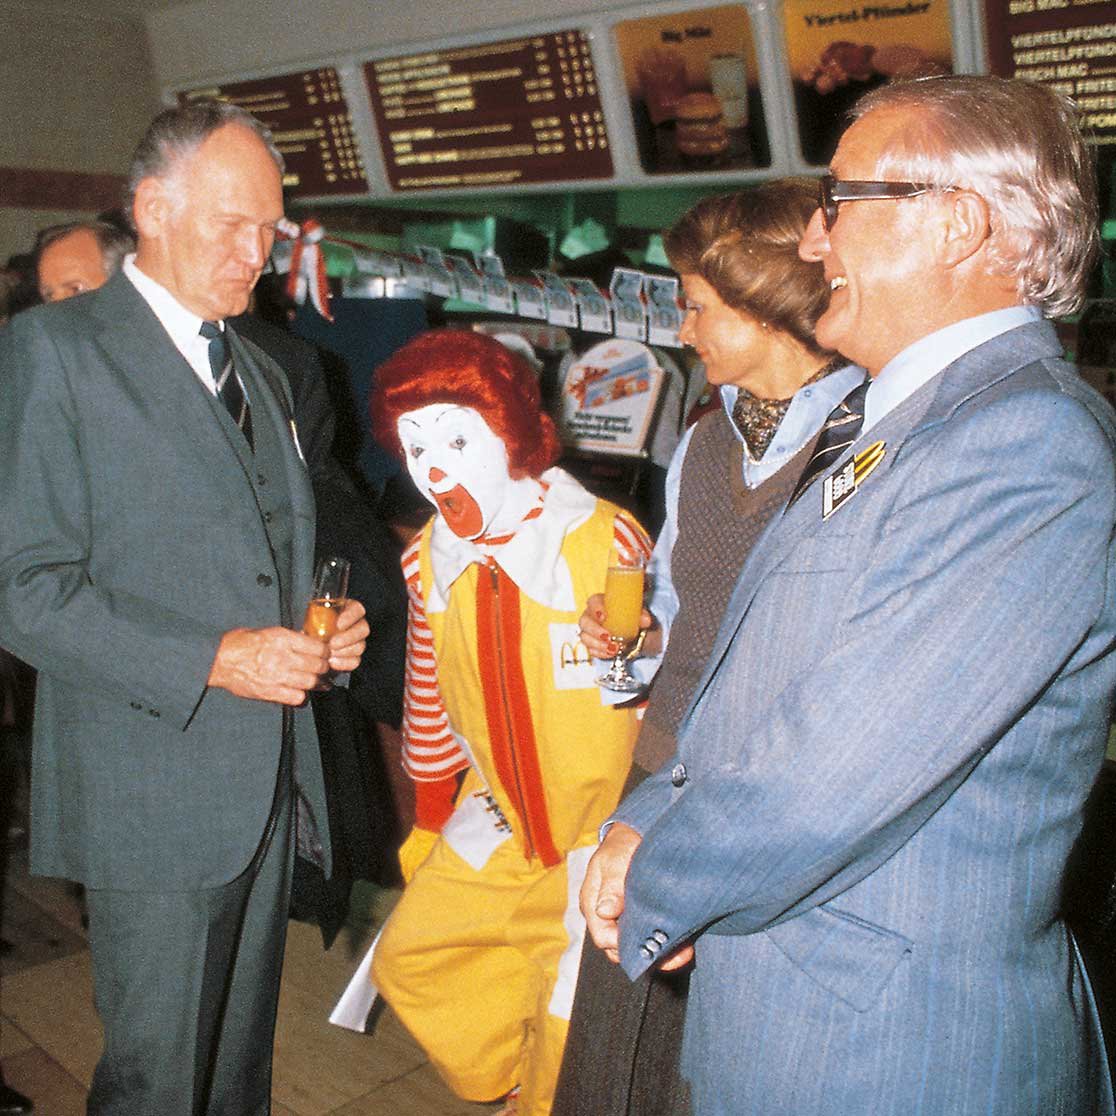 The Clown Ronald McDonald surrounded by people 